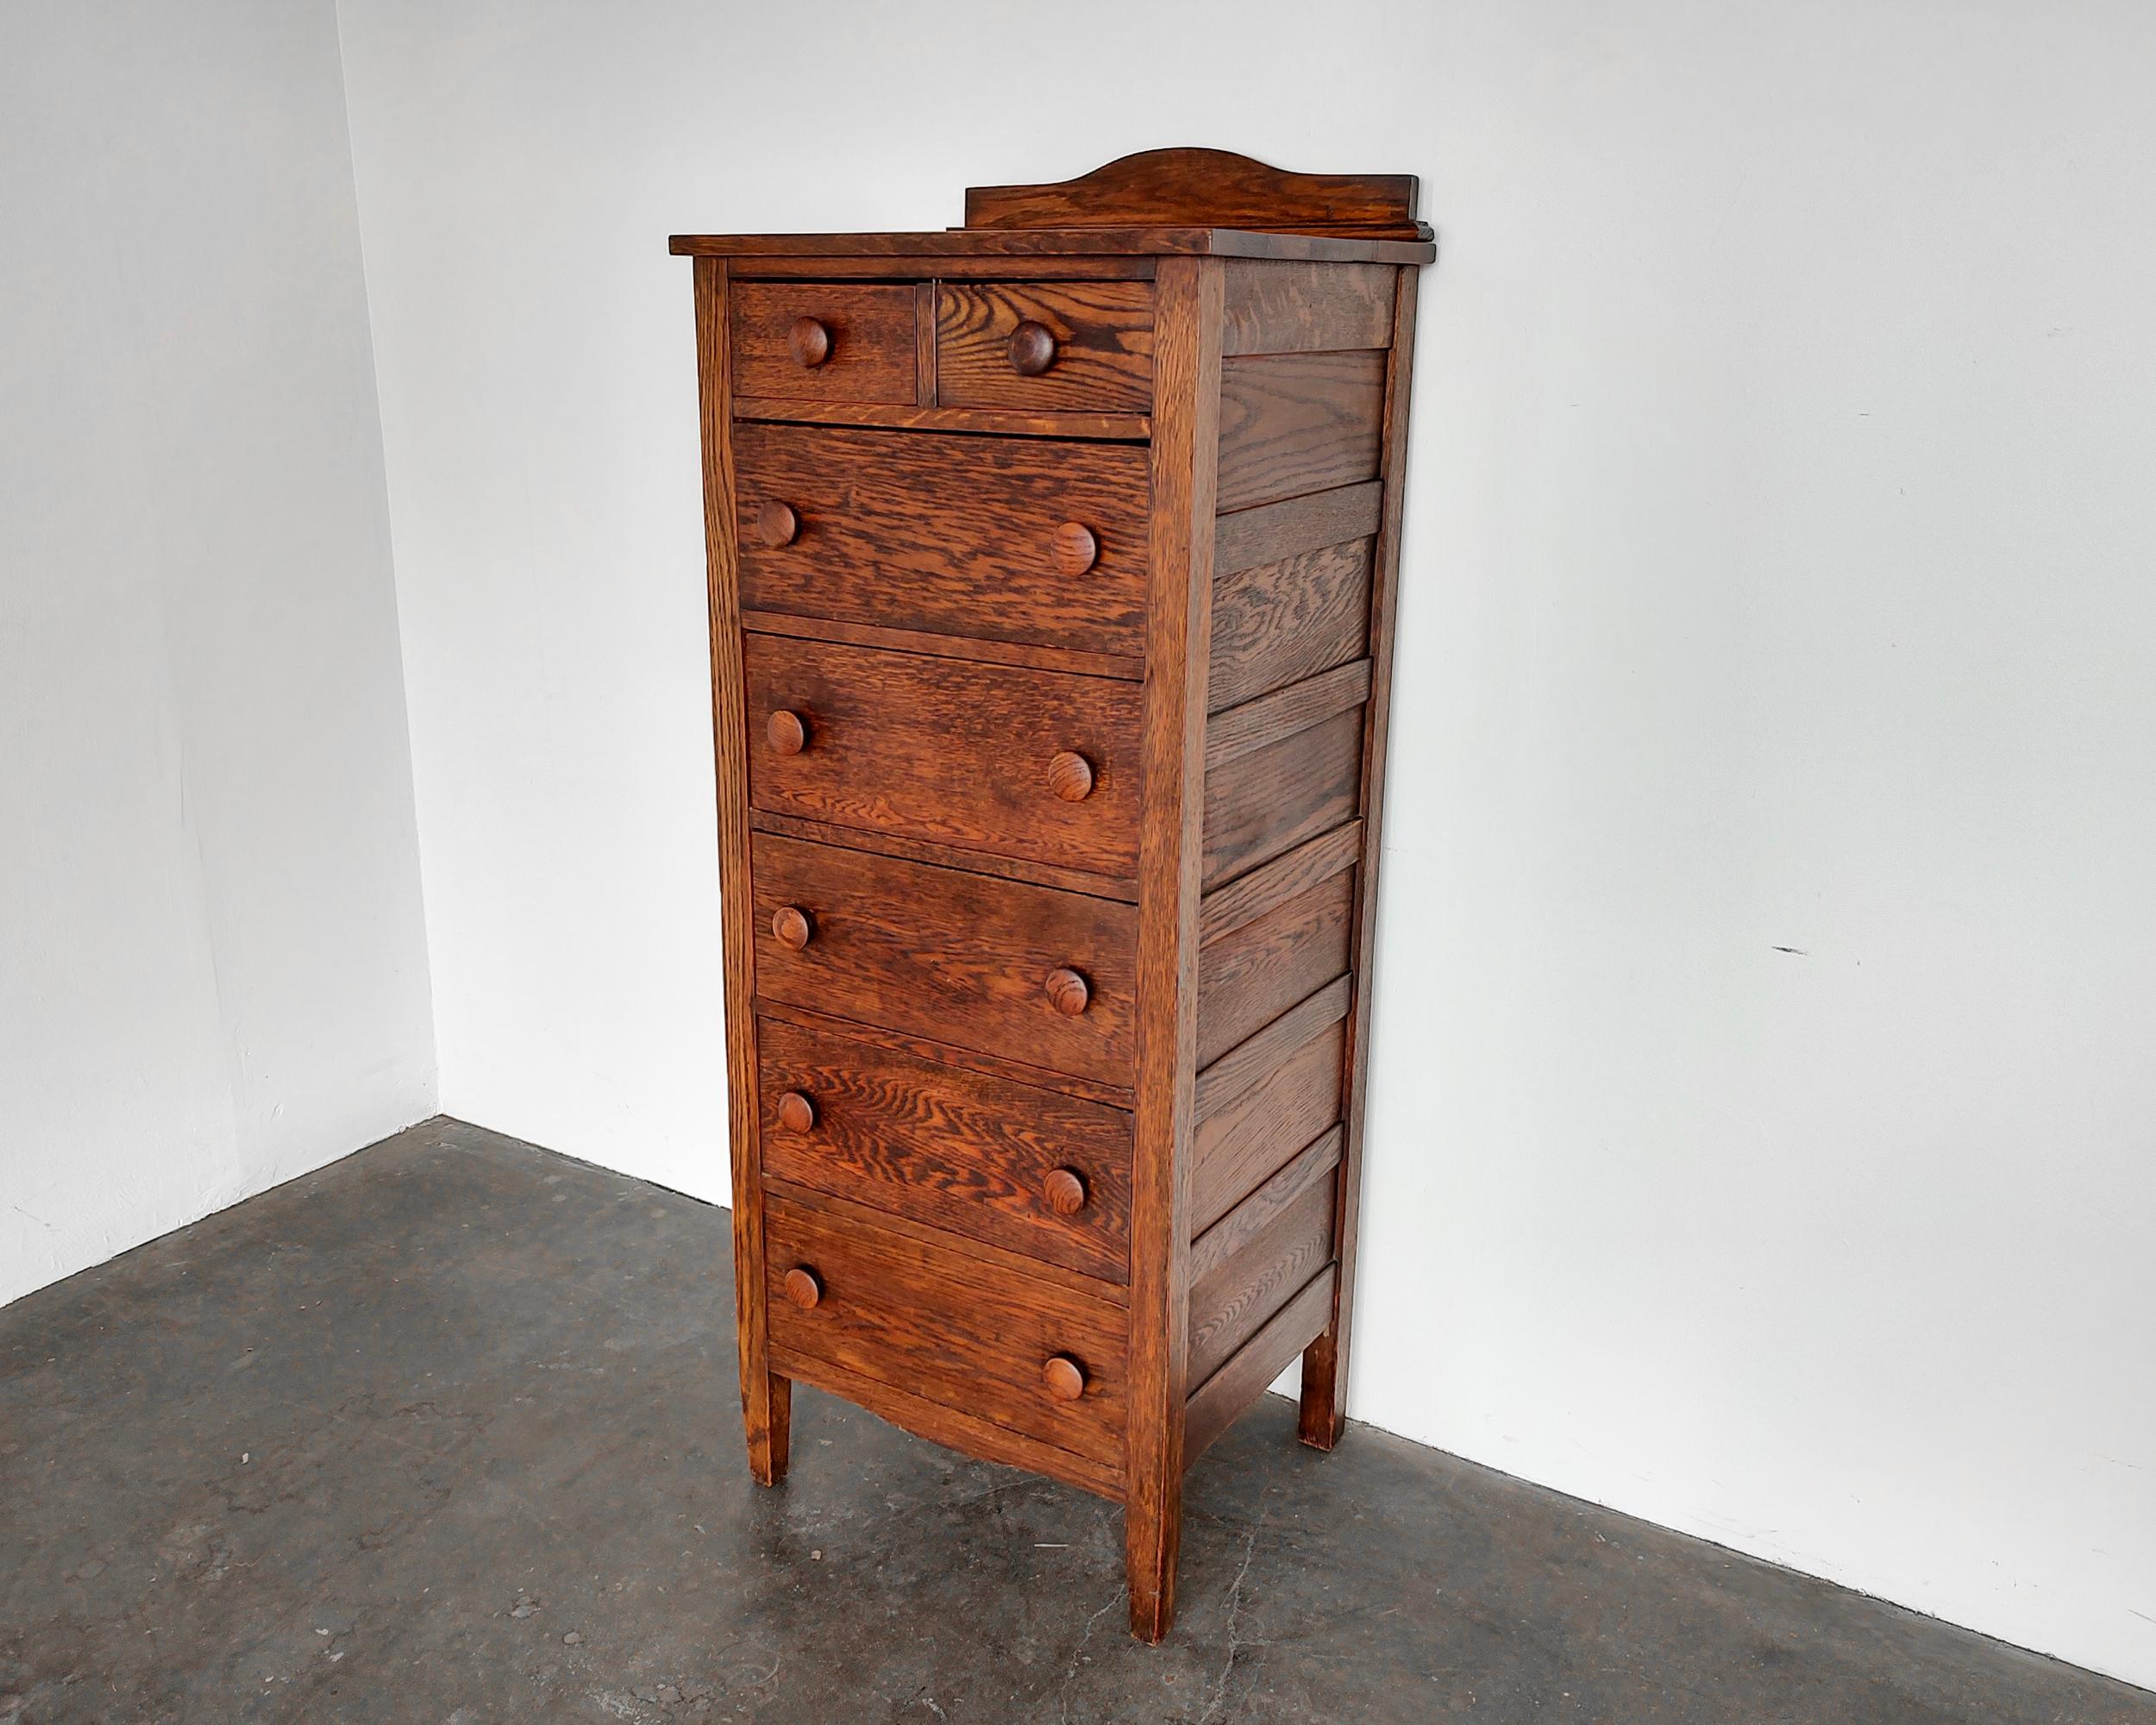 Antique chest of drawers made from solid oak hardwood with dovetail joinery. Six larger drawers and two small drawers at the top with matching oak pulls. Good vintage condition with some light wear.

52